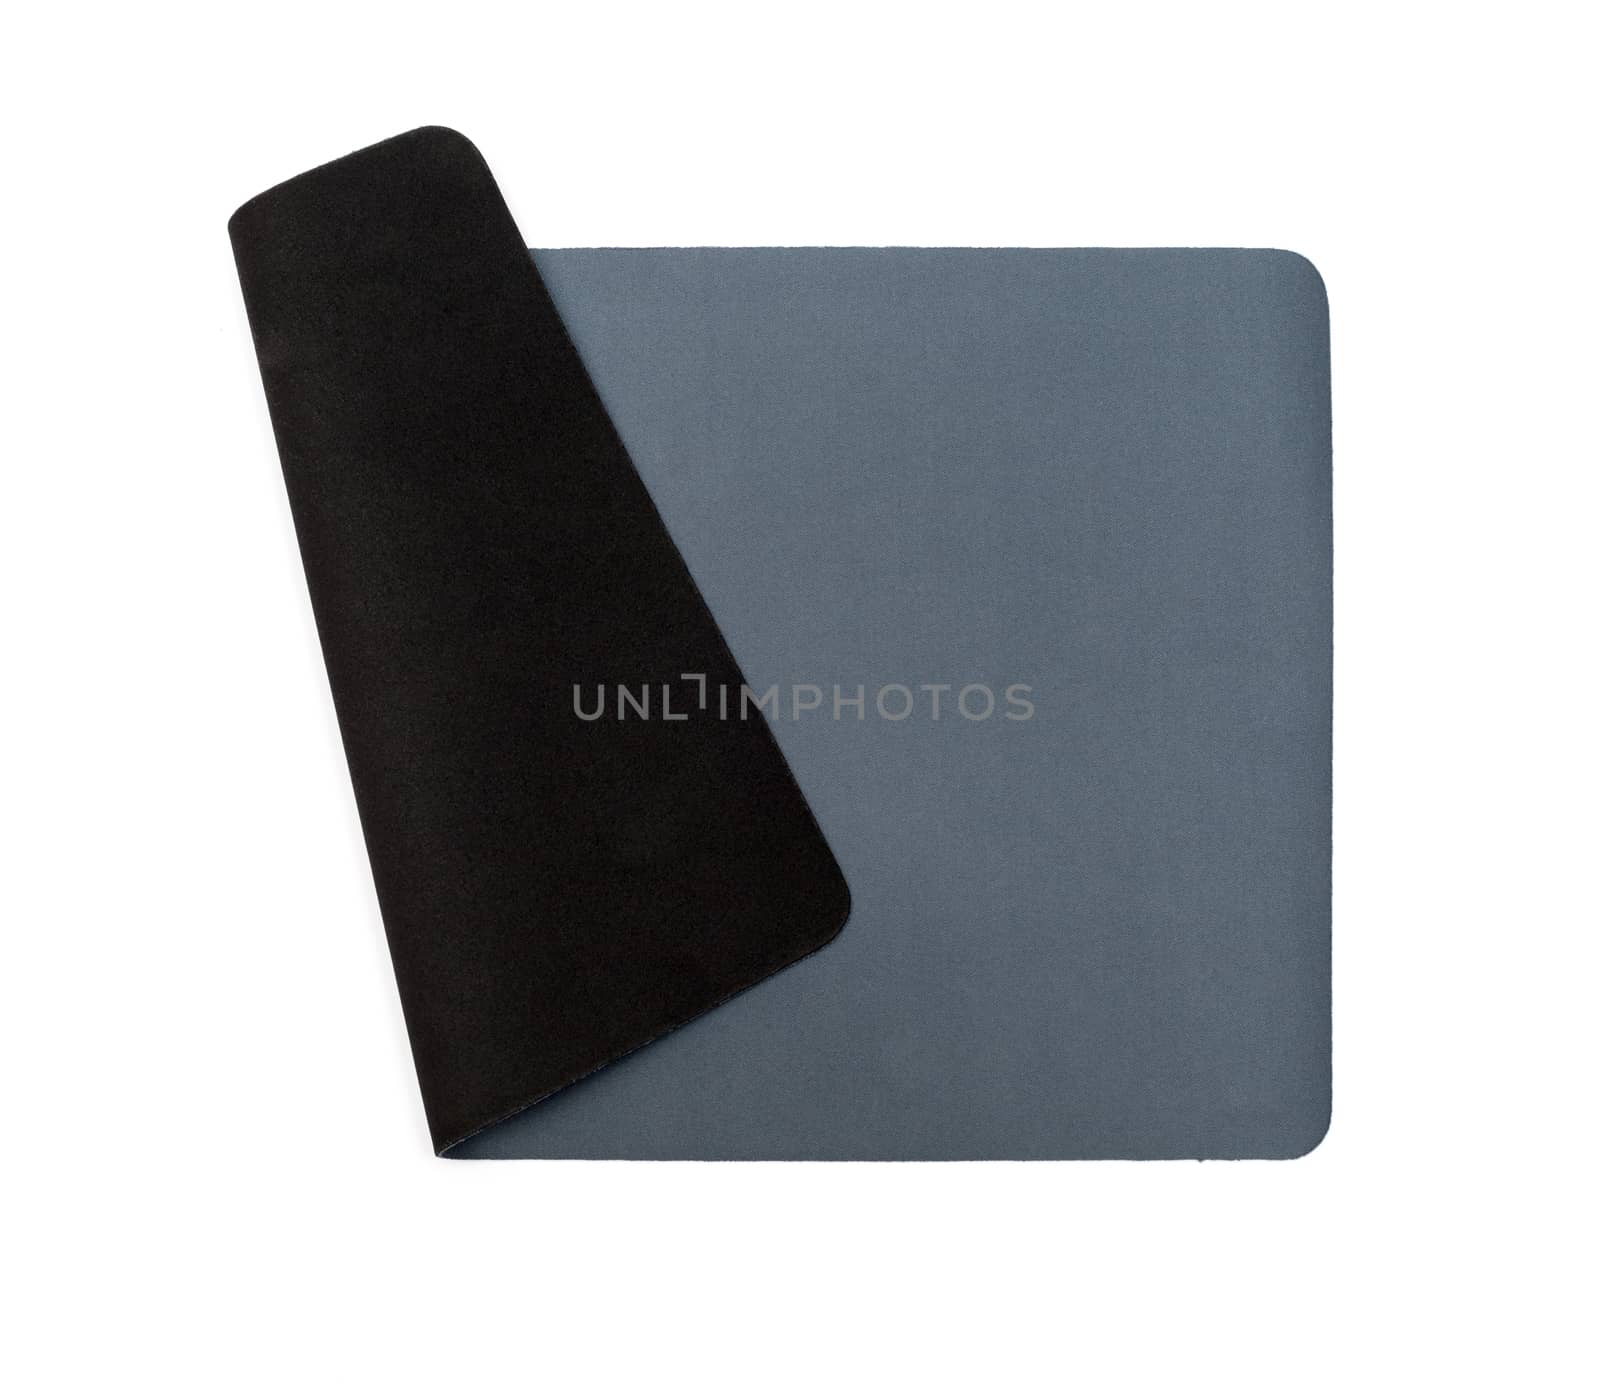 Grey mouse-pad isolated on white background